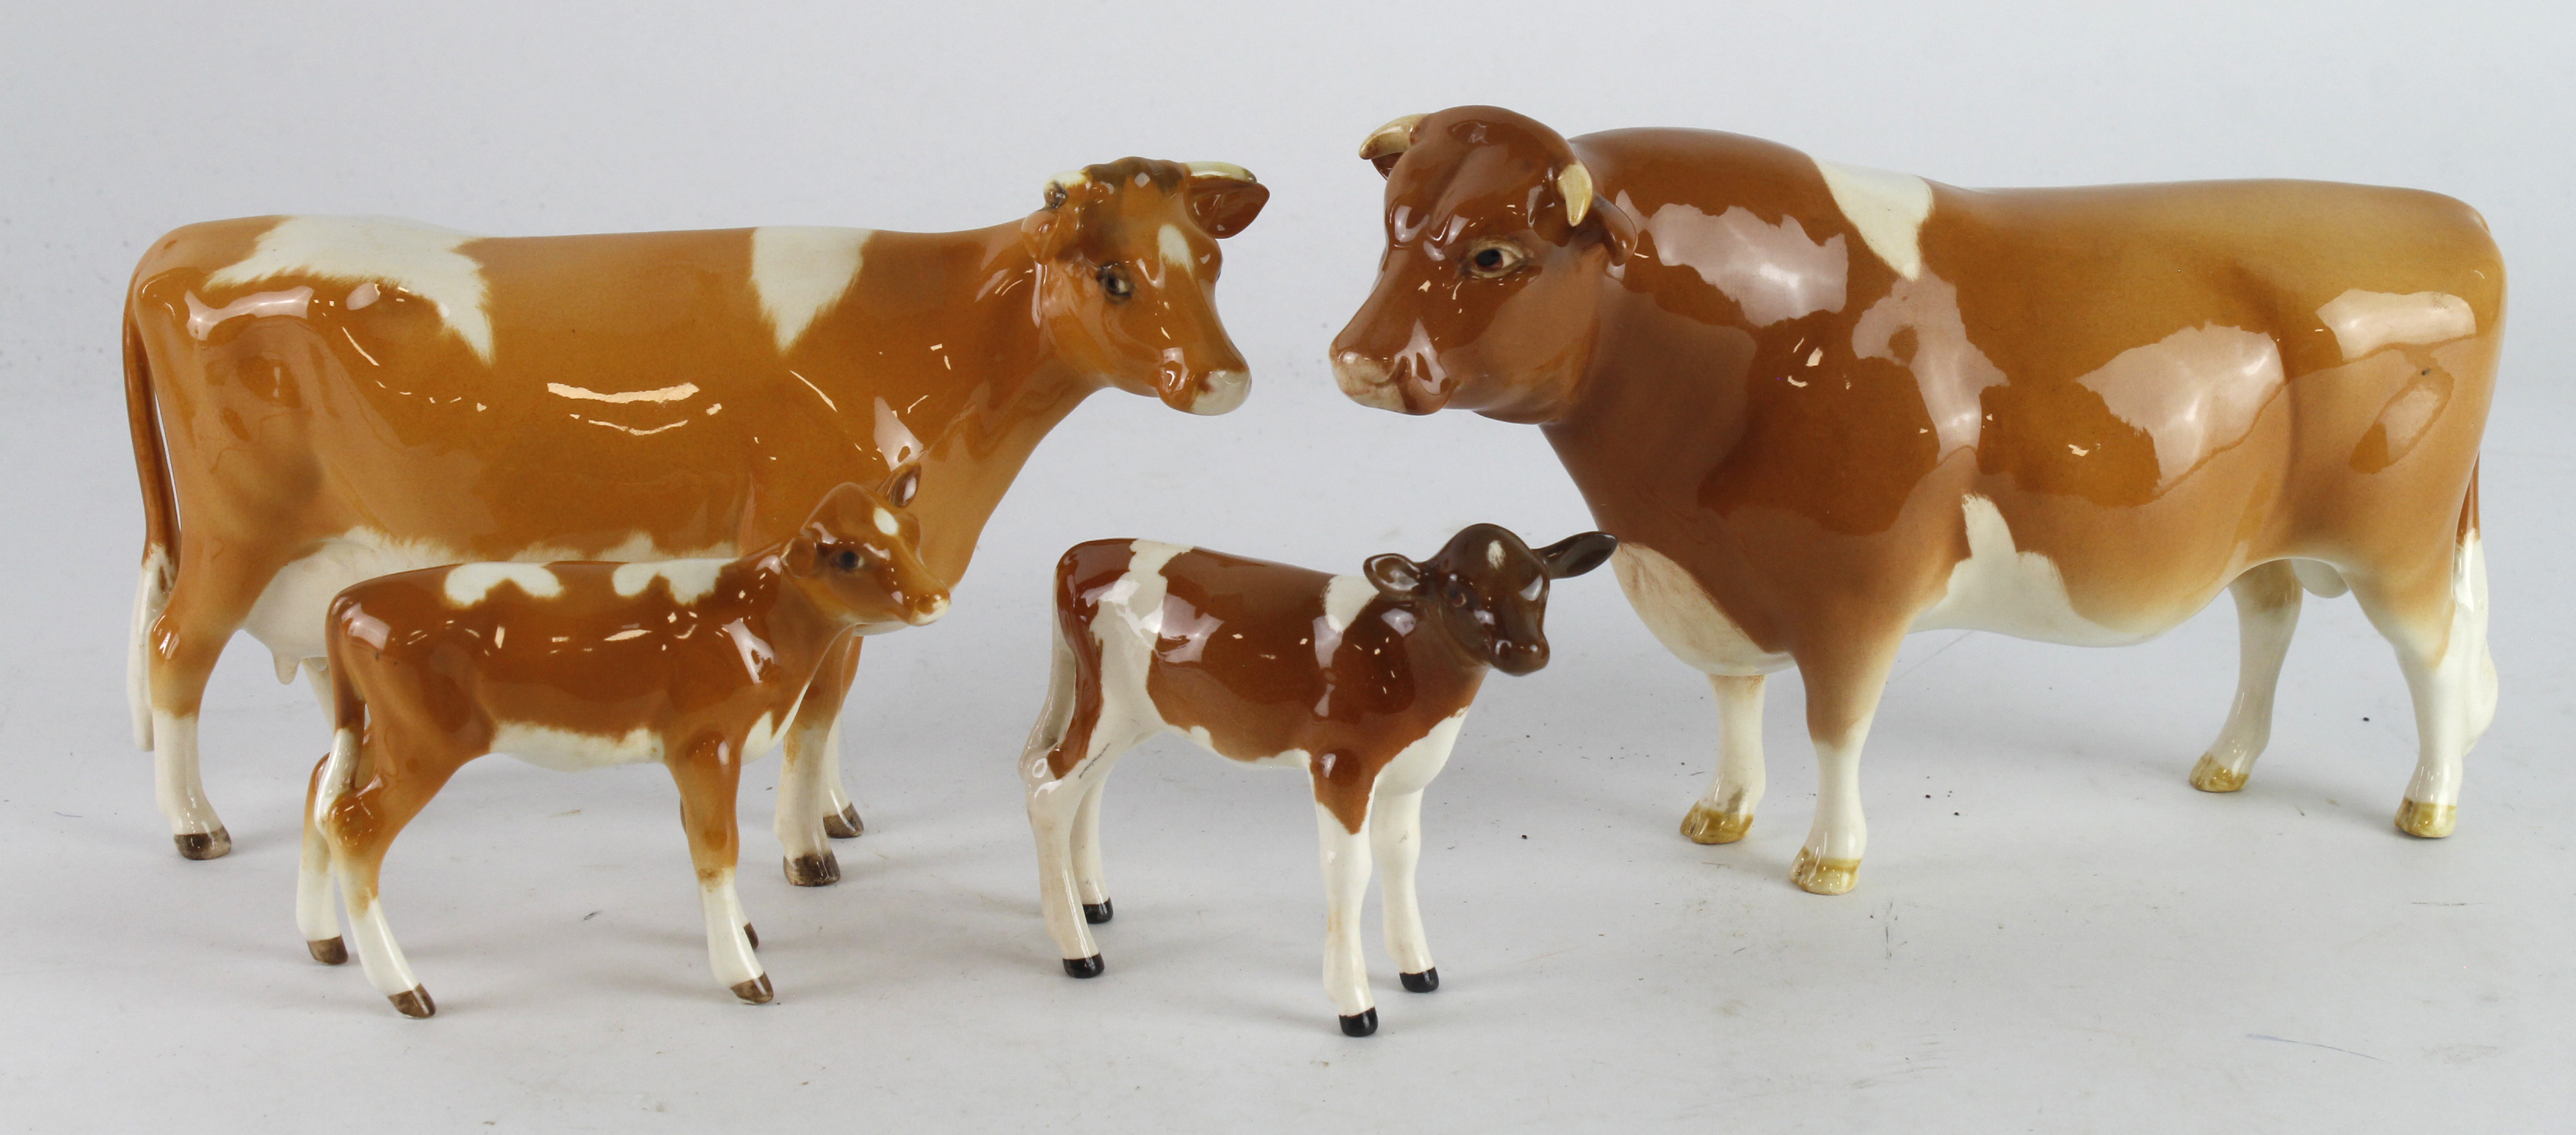 Beswick. Four Beswick figures, comprising Guernsey Bull, Cow & two Calves, tallest 10.5cm approx.